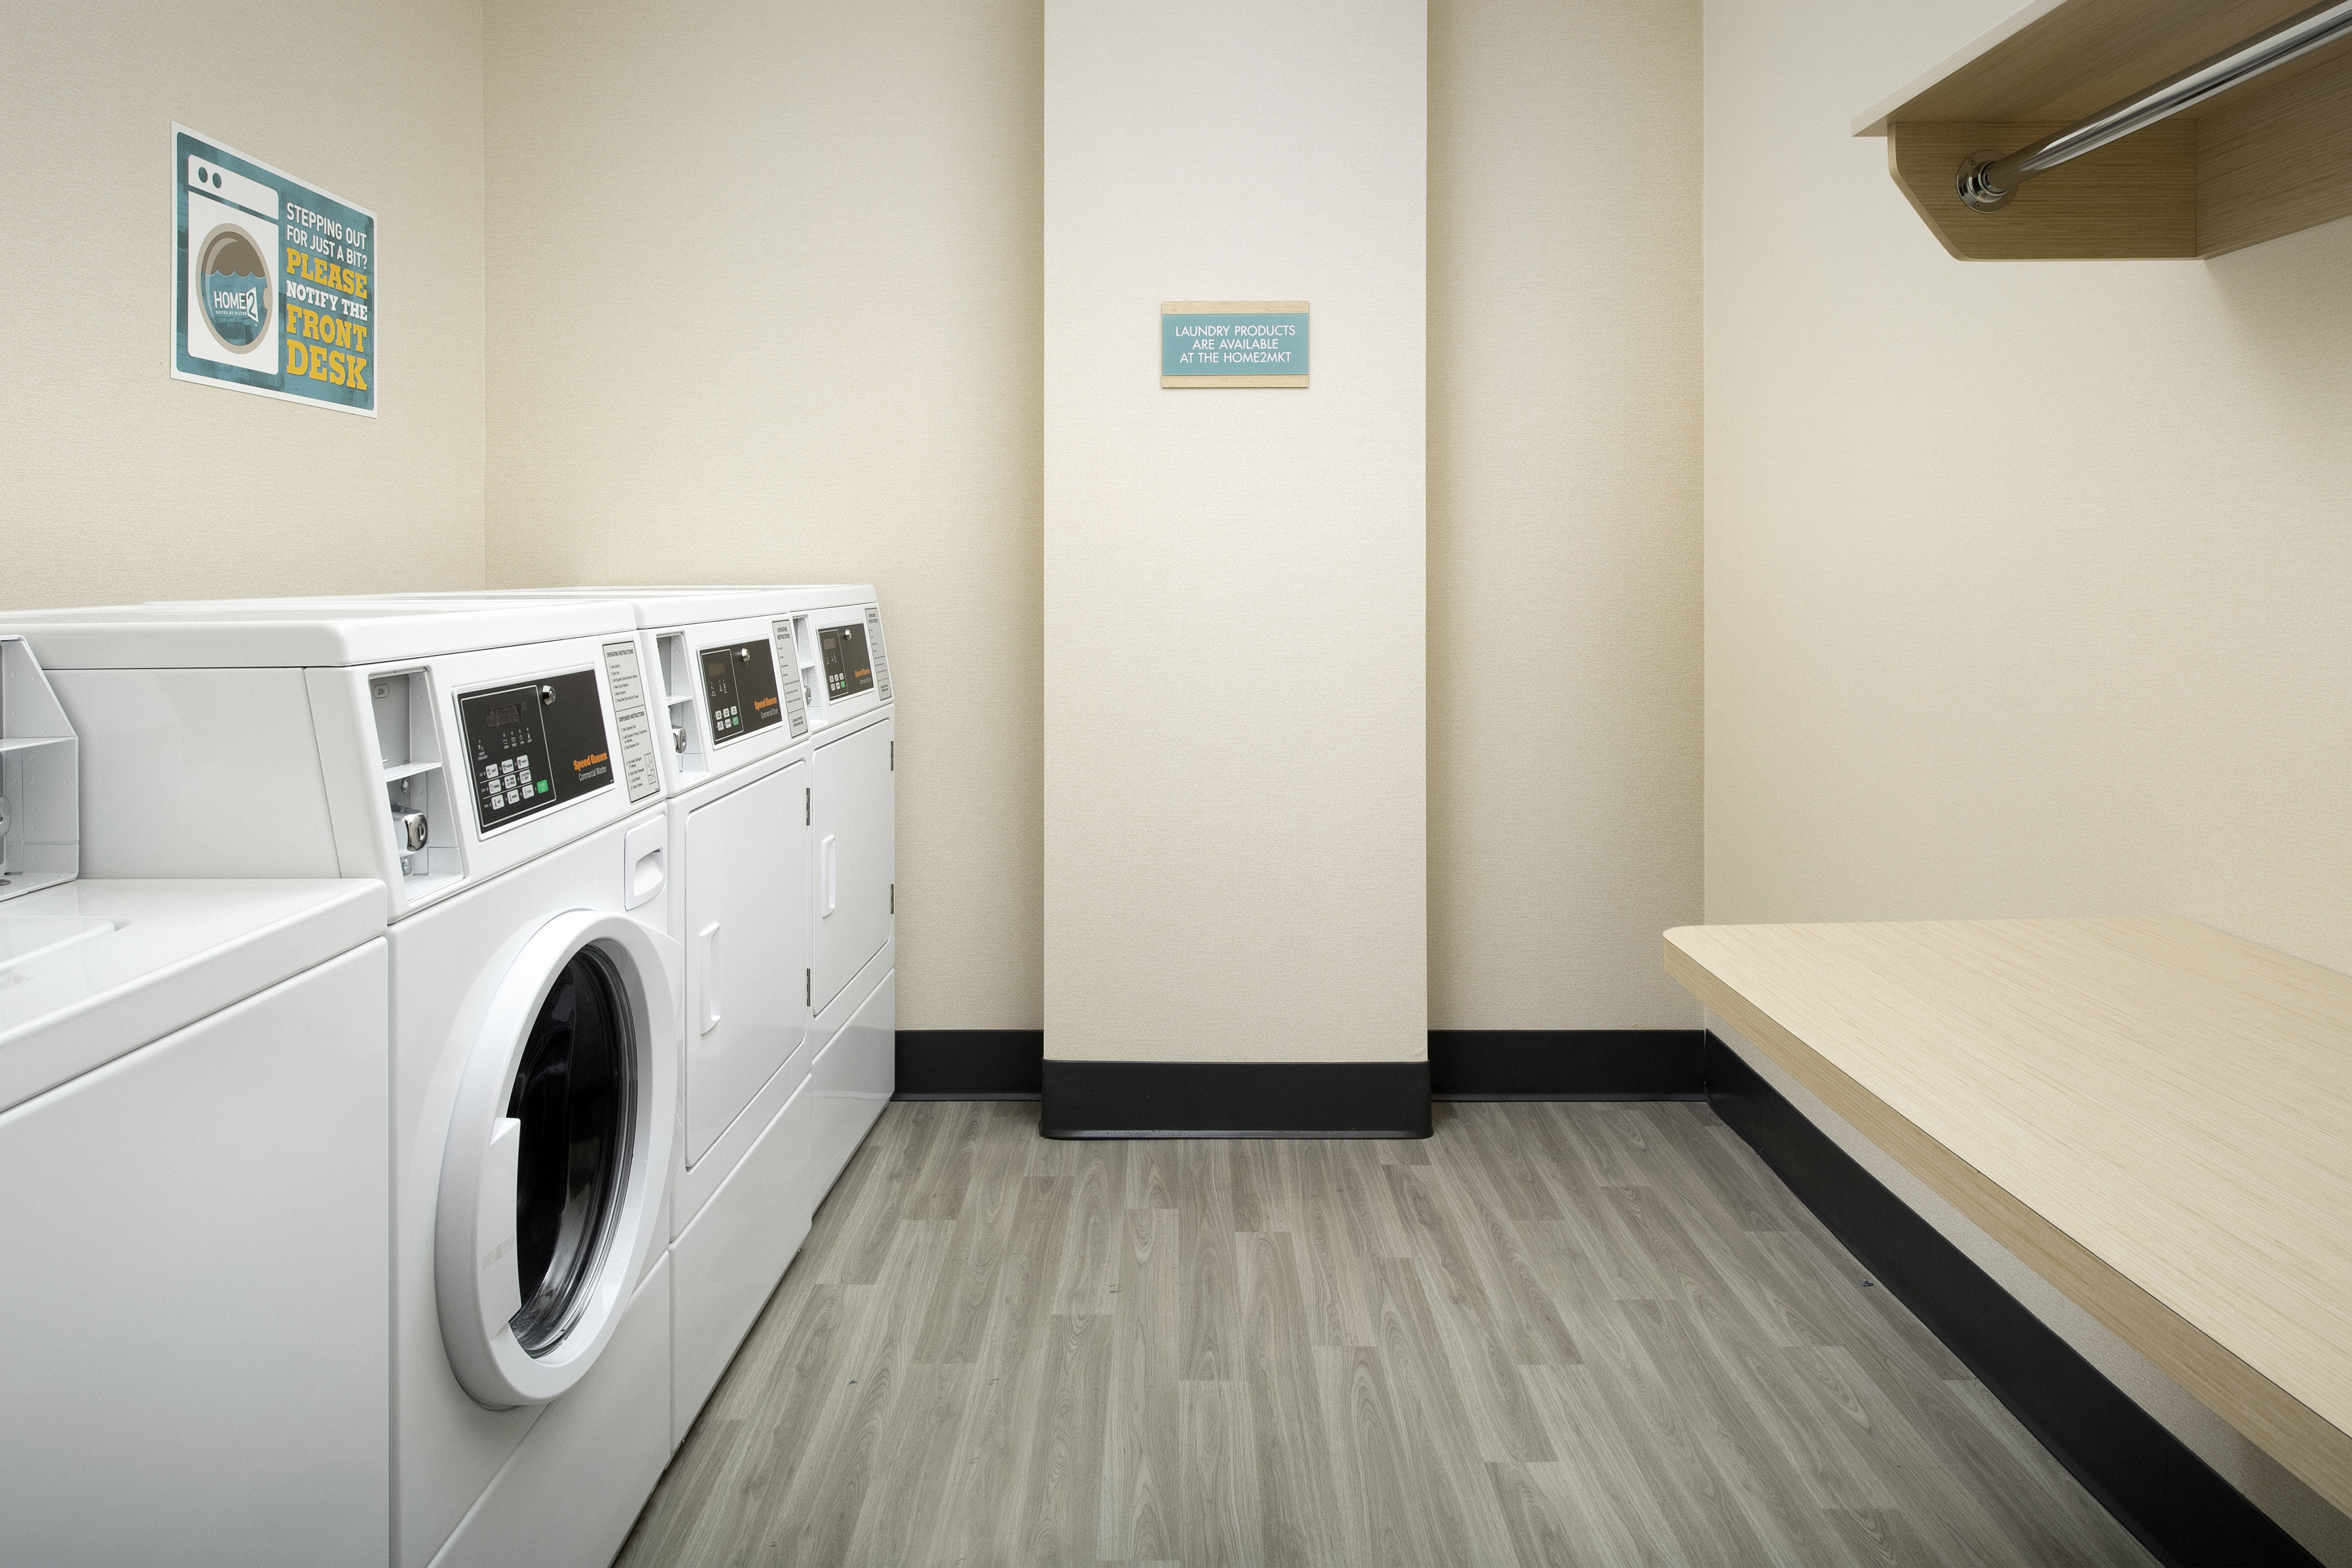 Laundry machines with sitting area